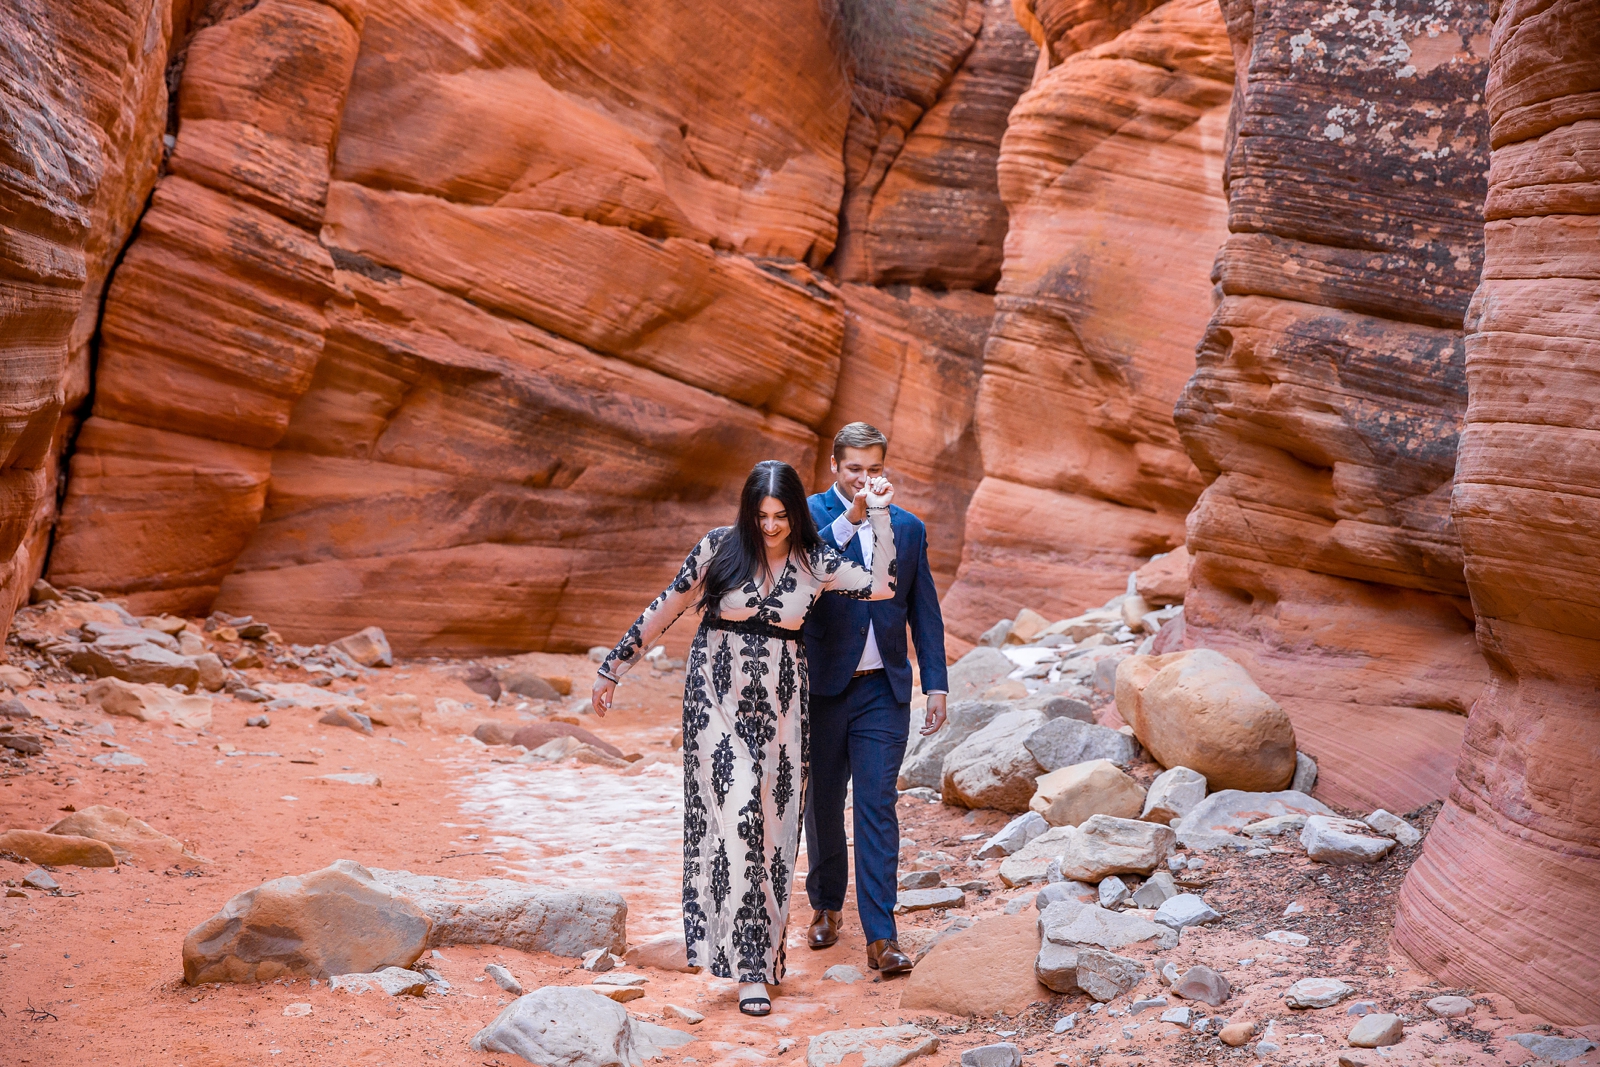 Hiking engagement session in a Utah slot canyon.